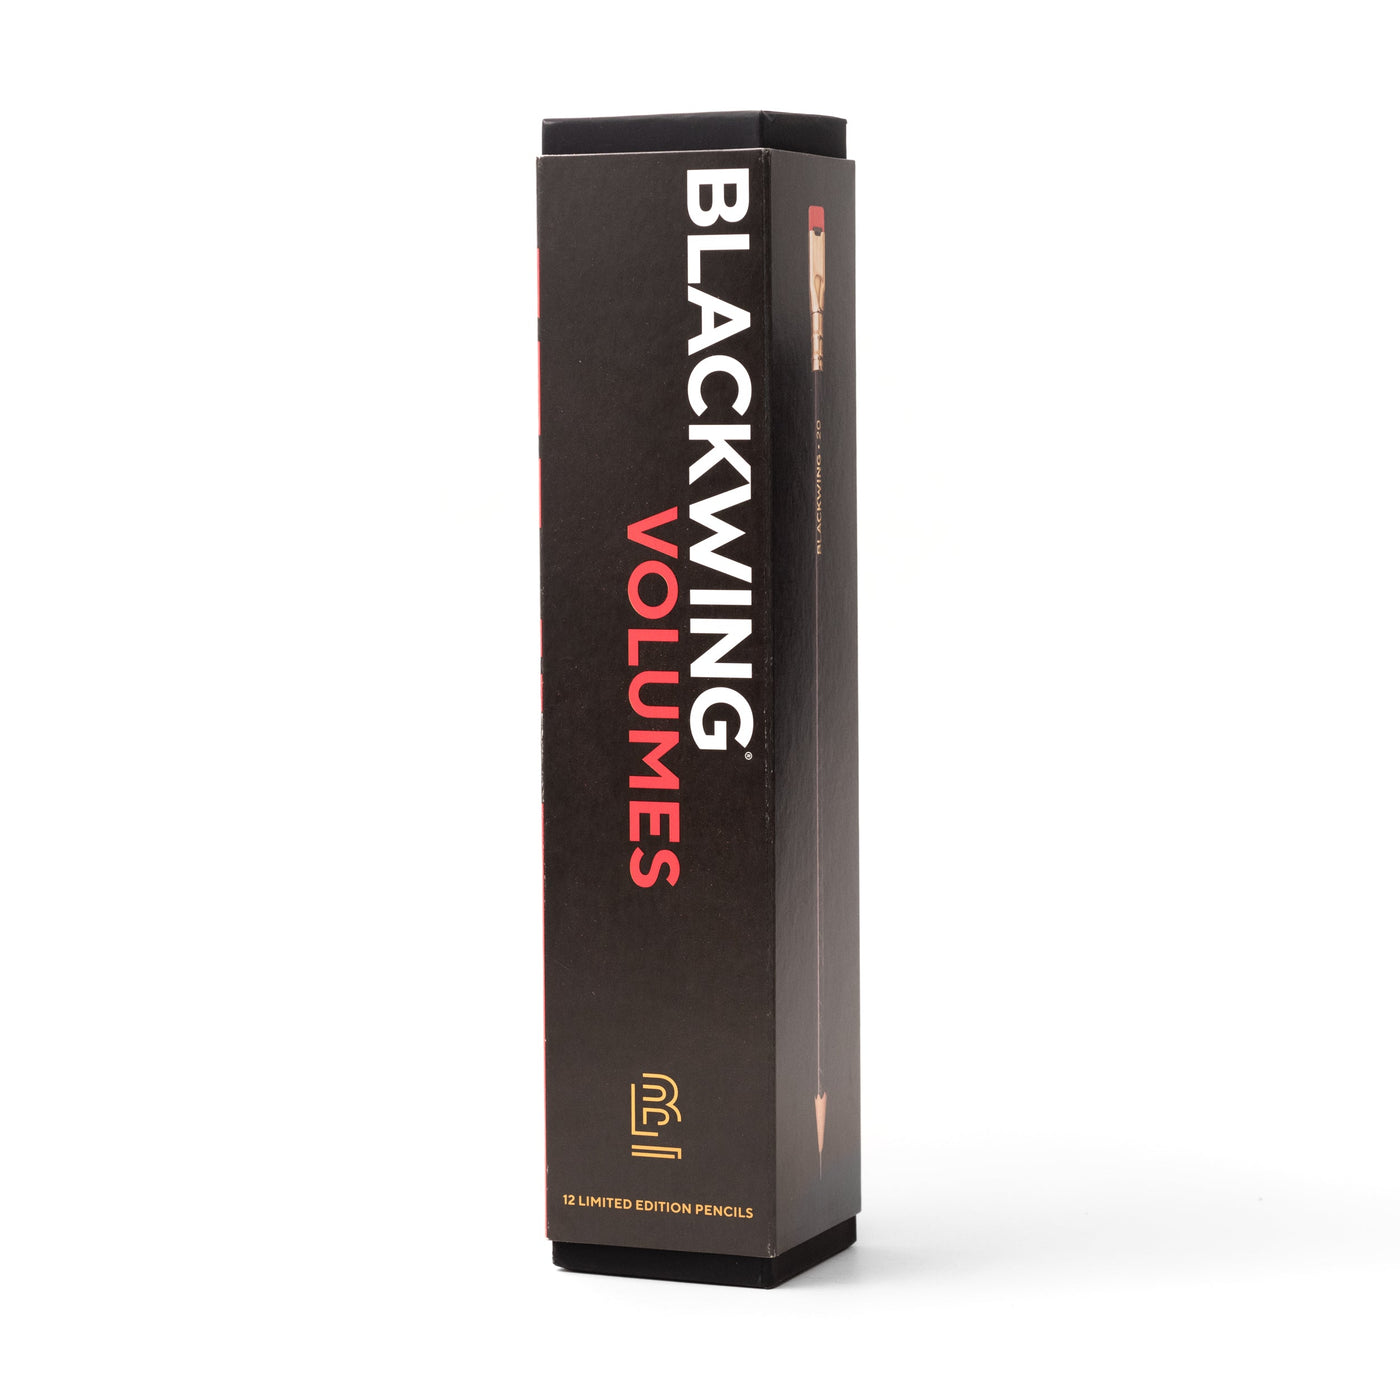 Blackwing Limited Edition Volume 20 - Box of 12 Pencils